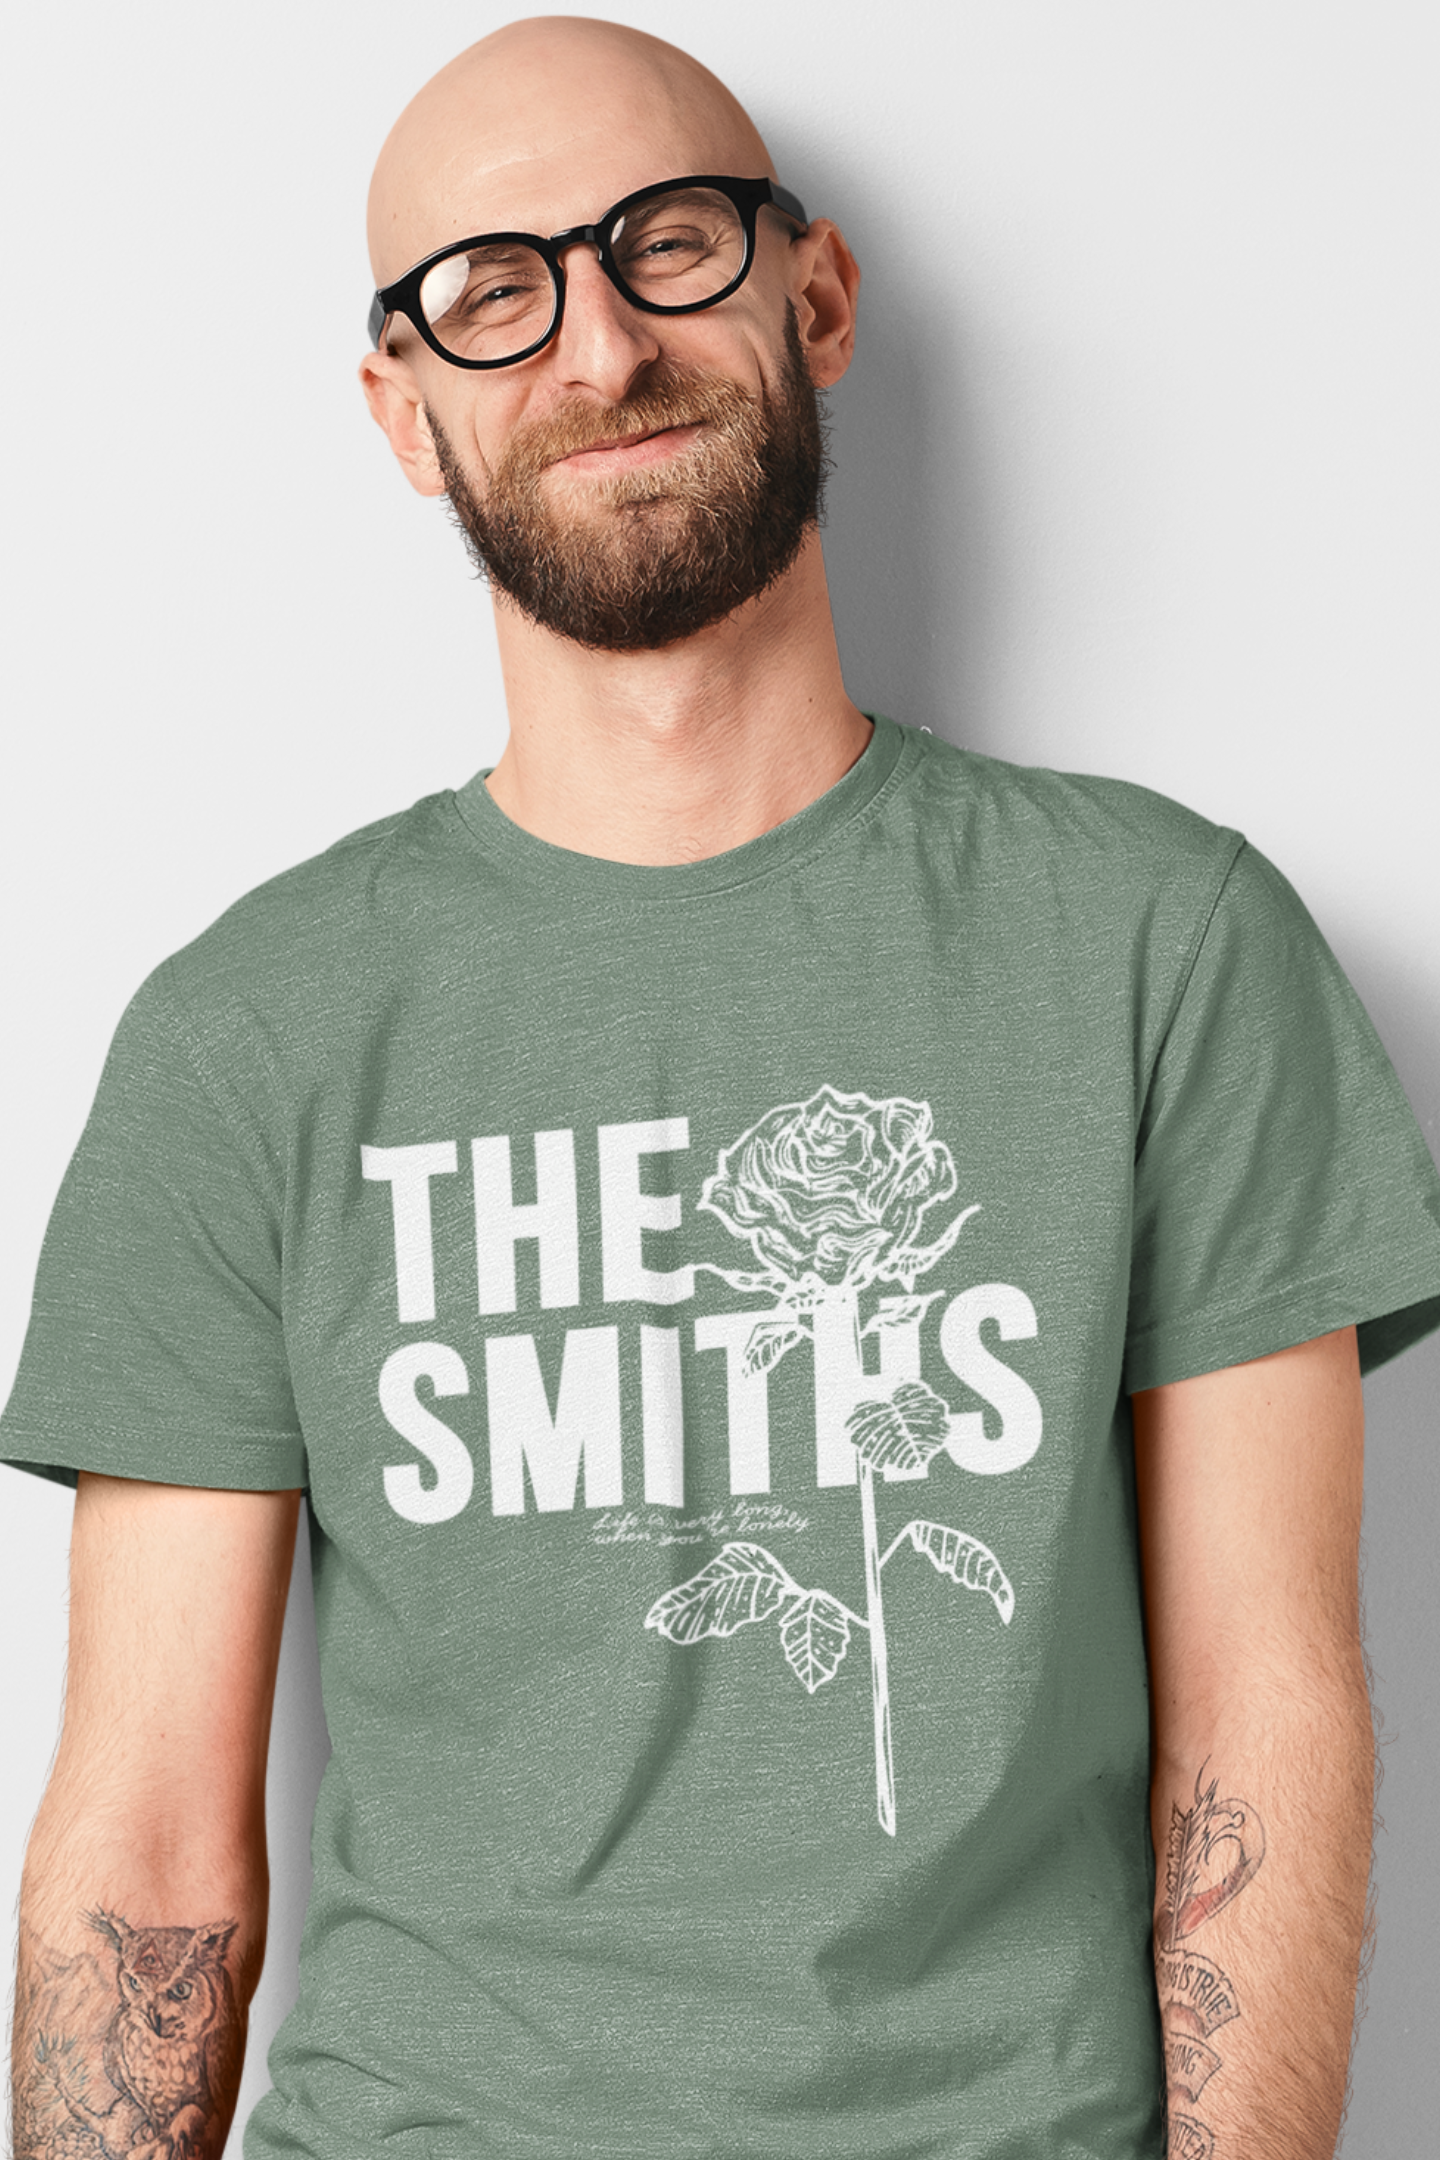 Life Is Very Long When You're Lonely T Shirt | The Smiths T Shirt | The Smiths Gift | Rock and Roll | Morrissey T Shirt